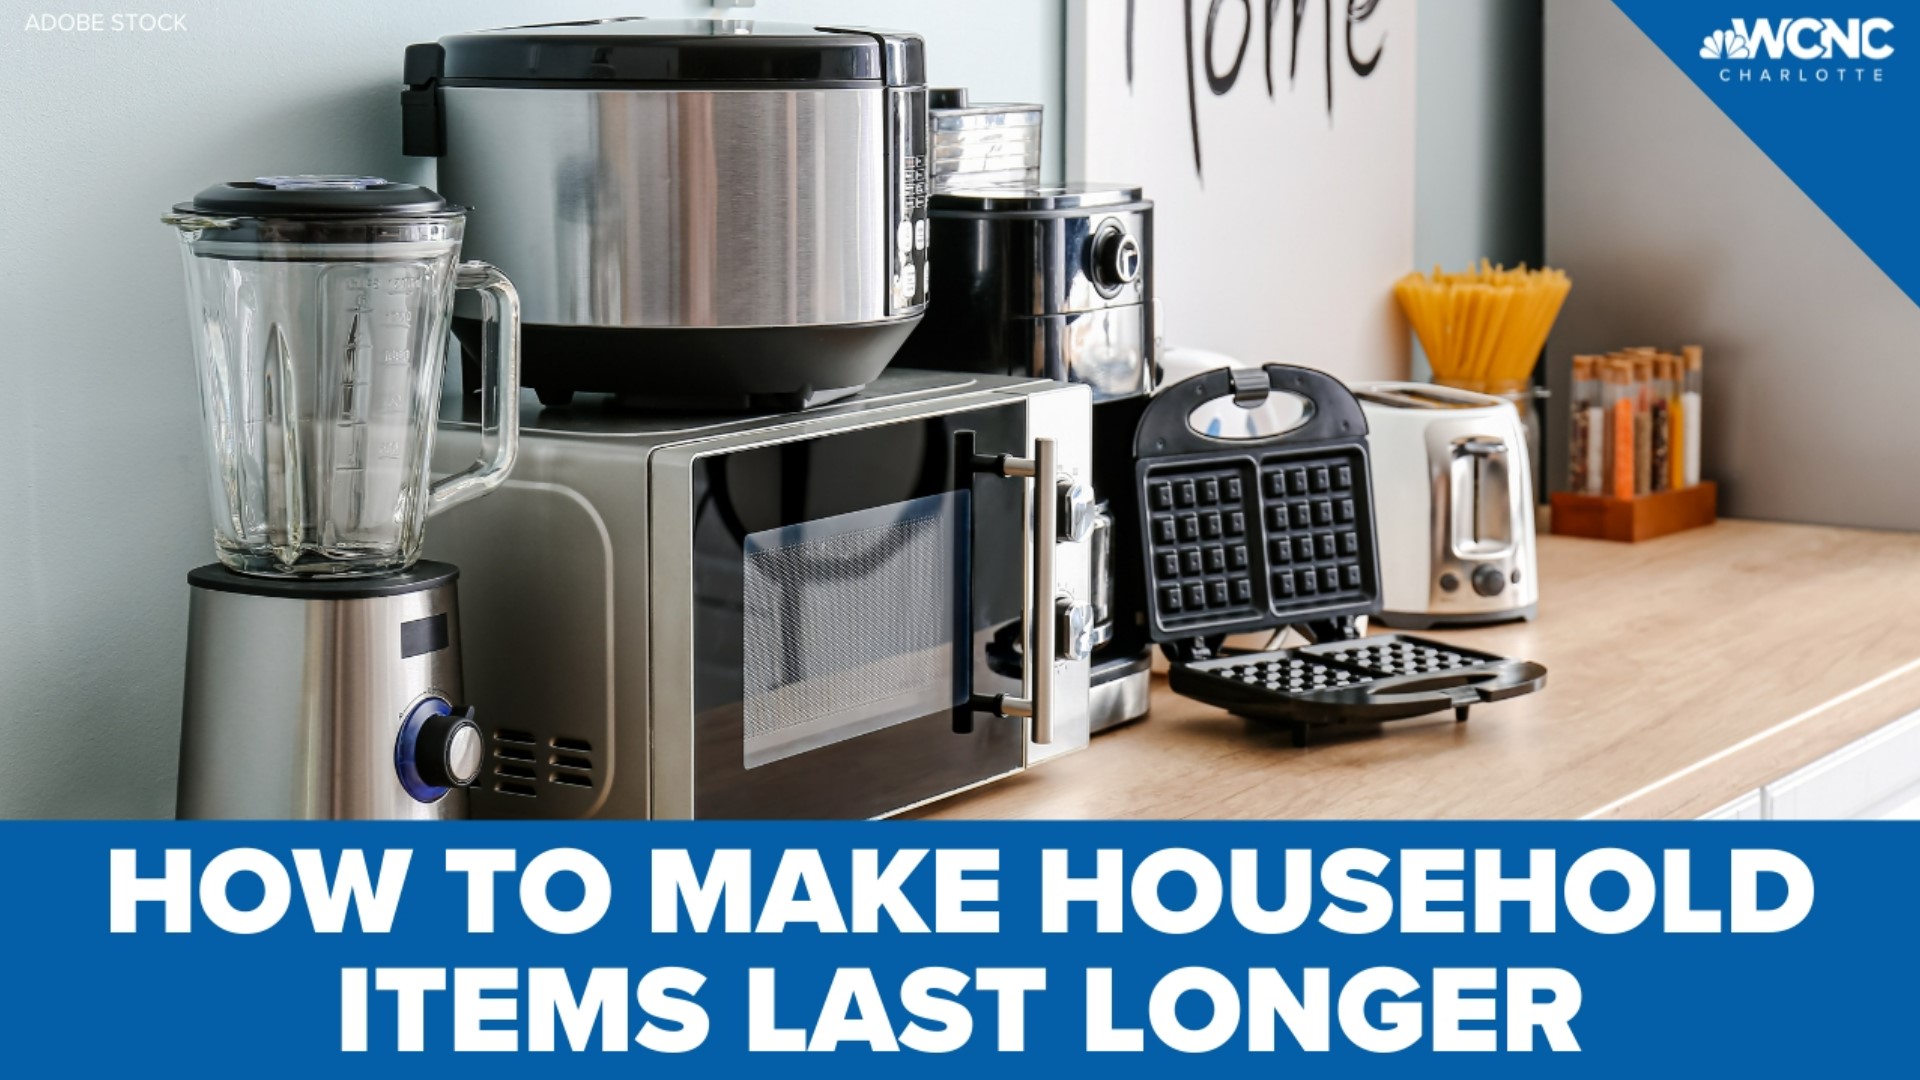 How to Save BIG on Household Goods